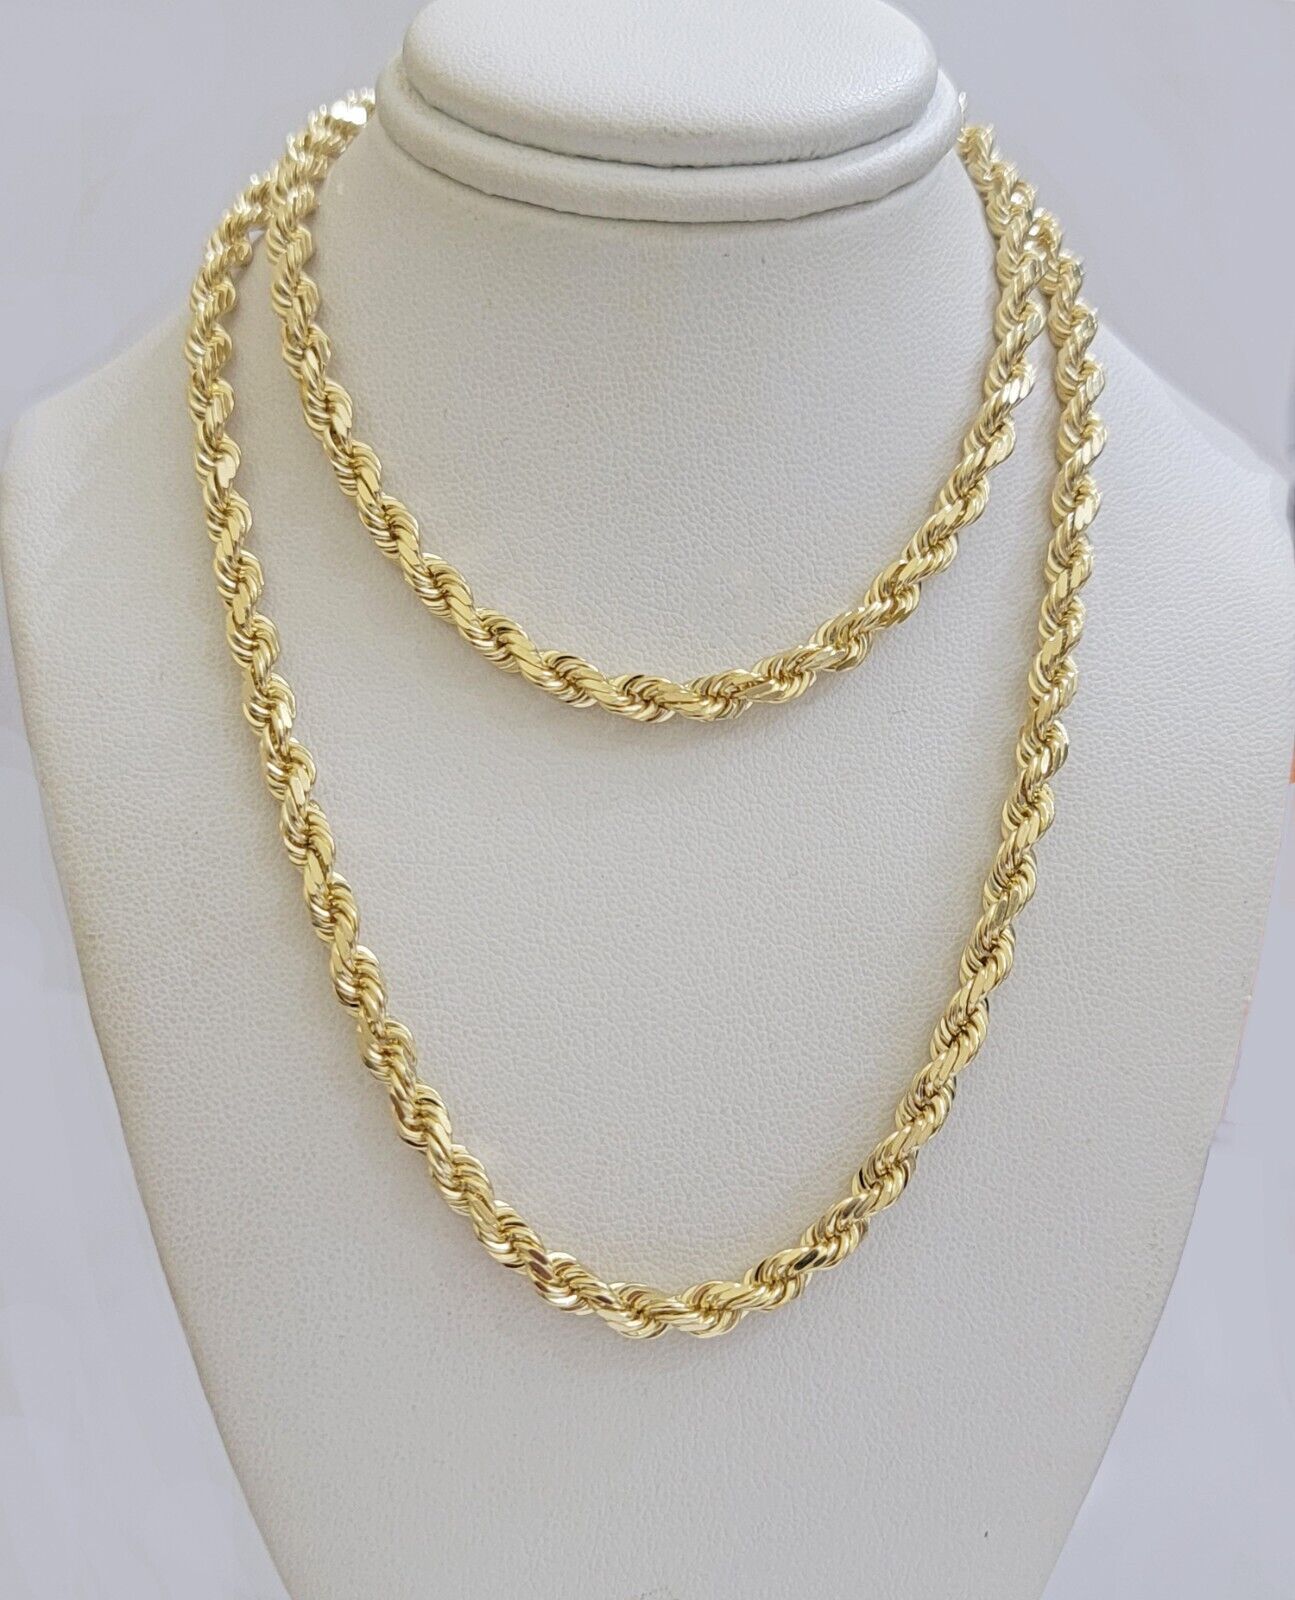 Real 14k Yellow Gold Rope Chain Necklace 4.5mm 18- 26 Inch Diamond Cut SOLID 14K